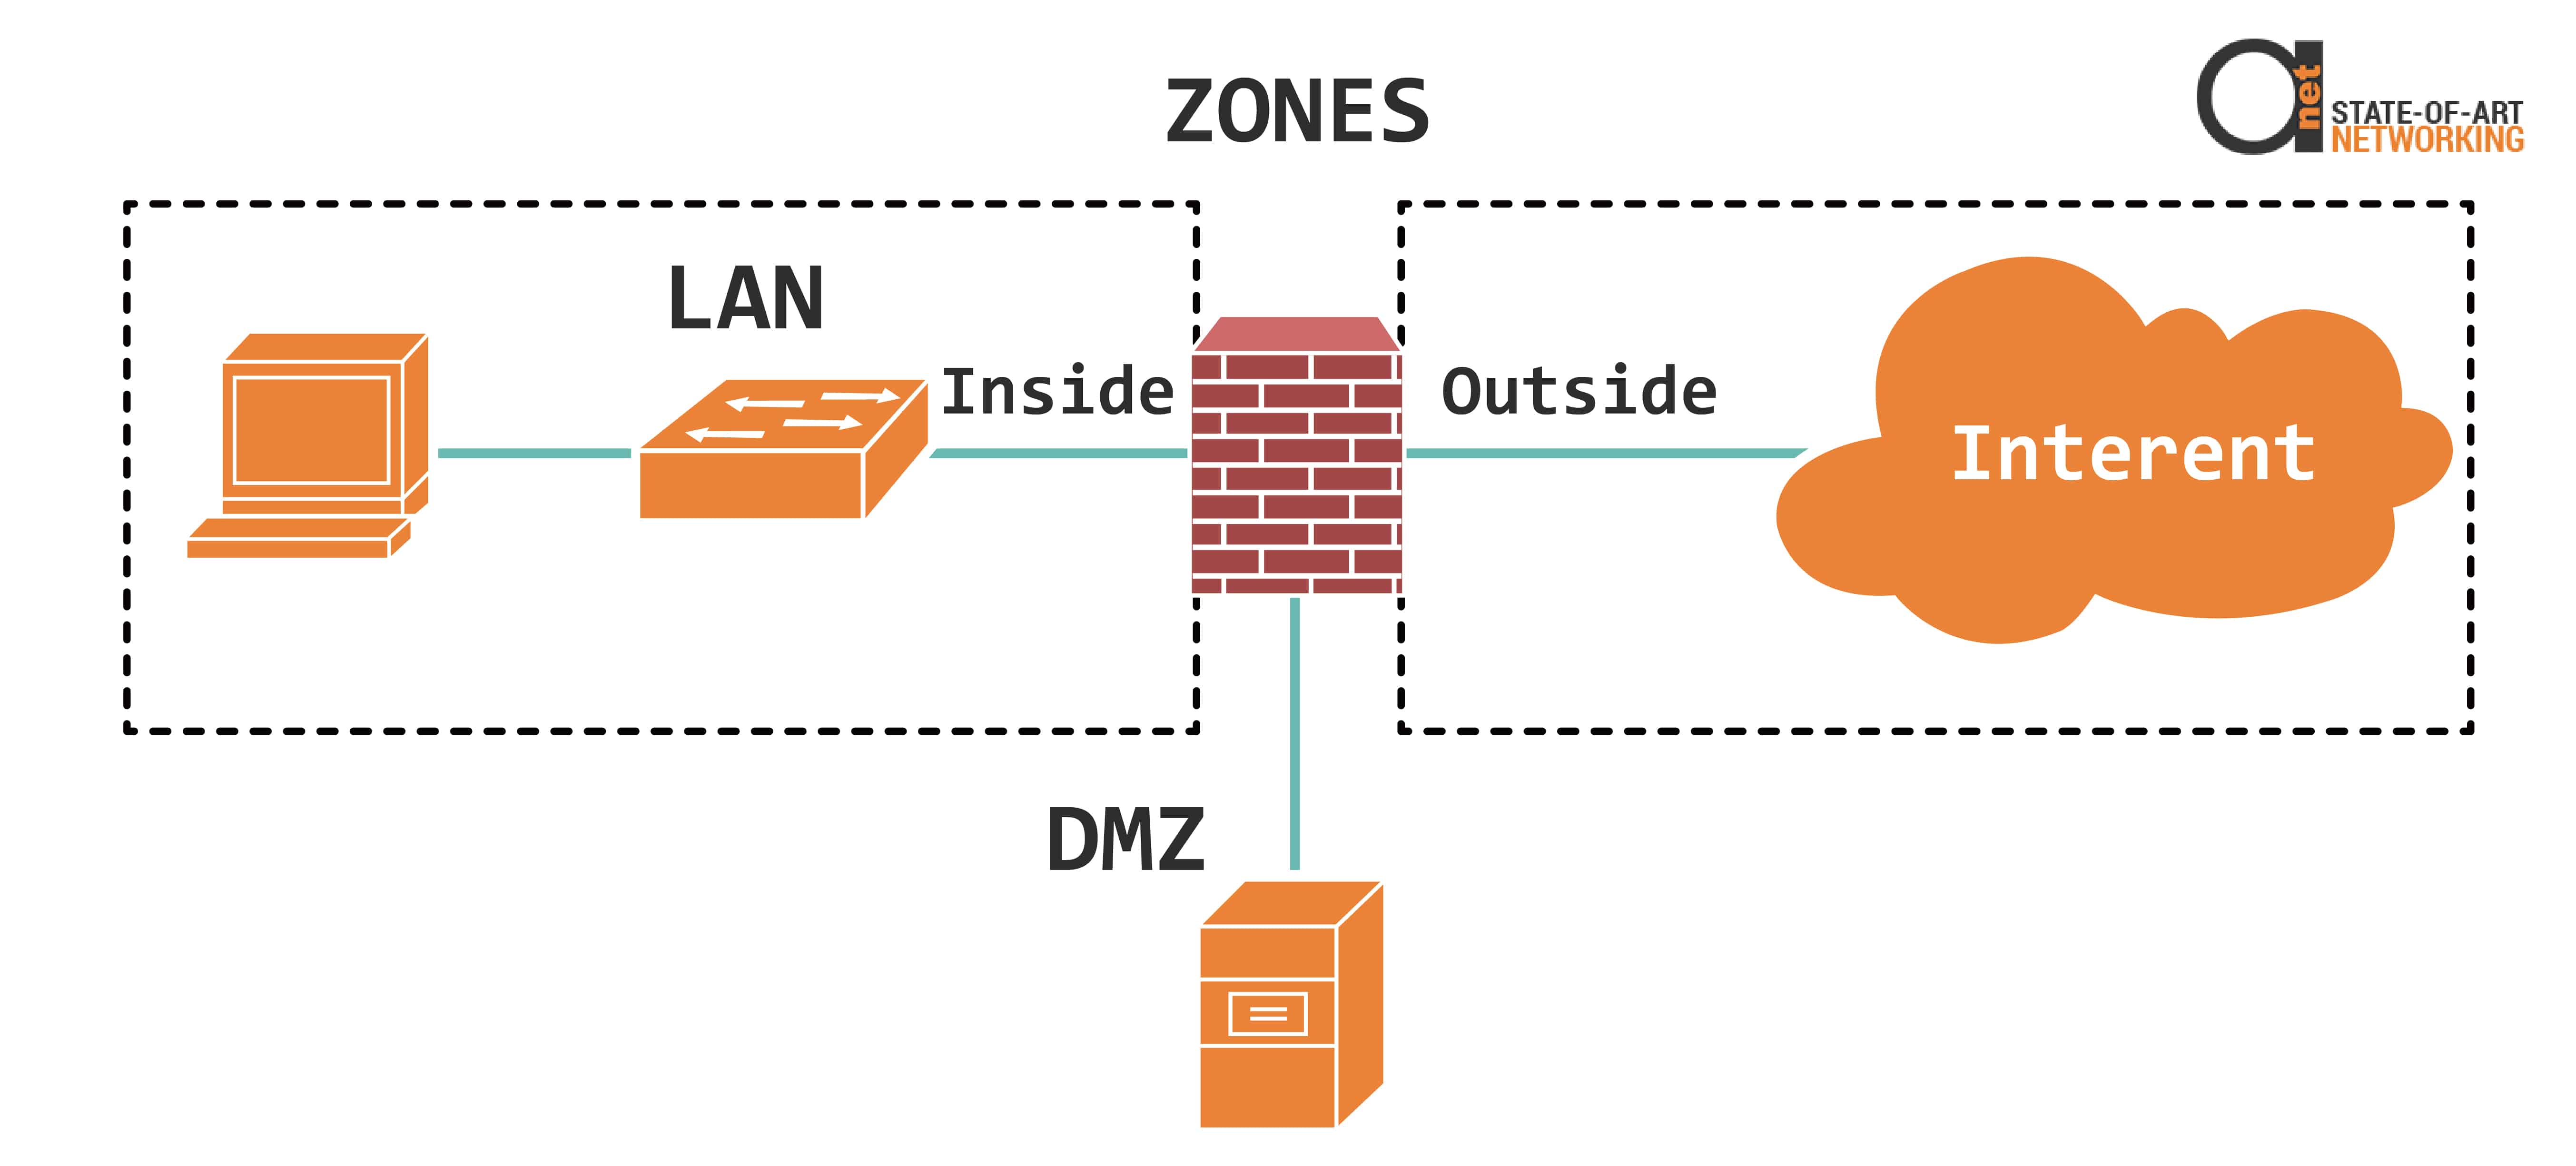 Inside, Outside and DMZ zones